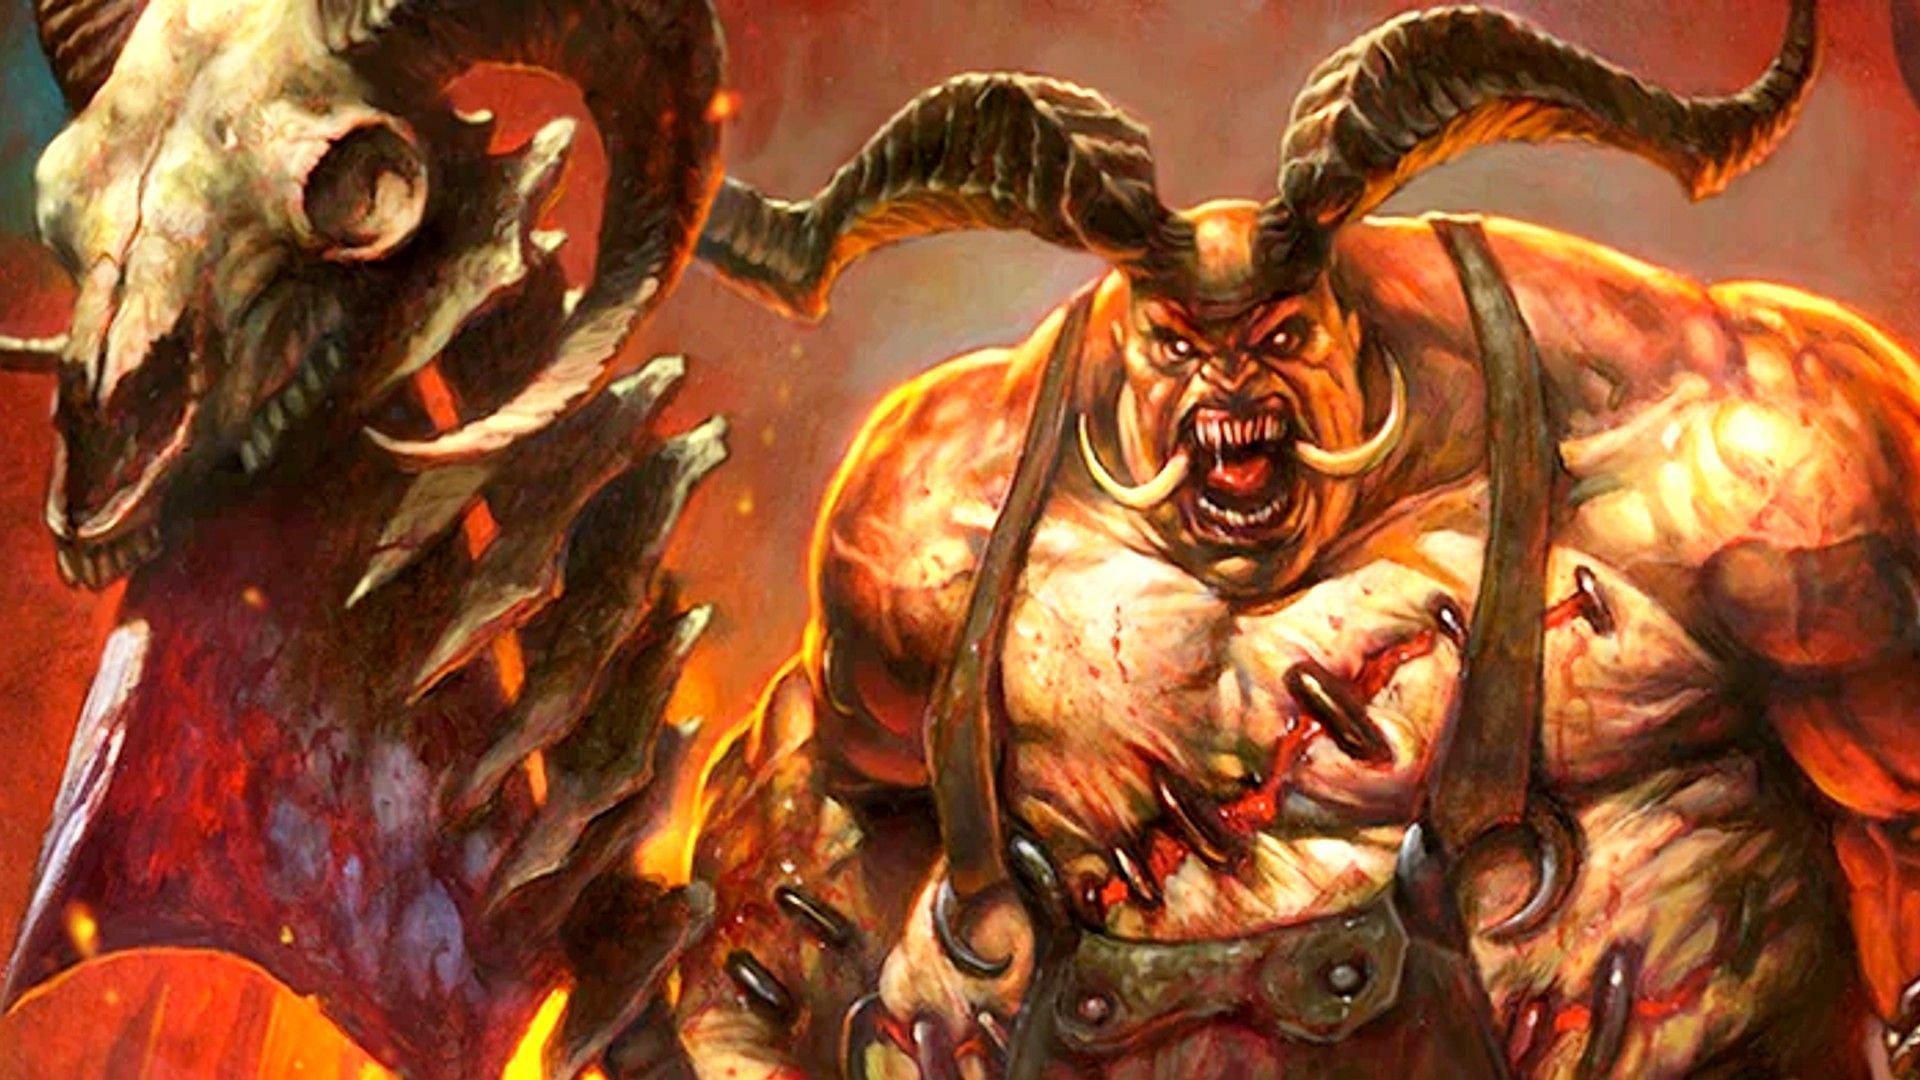 The Butcher is one of the strongest bosses in Diablo 4, and is one of the main reasons why the game can be challenging at times. 